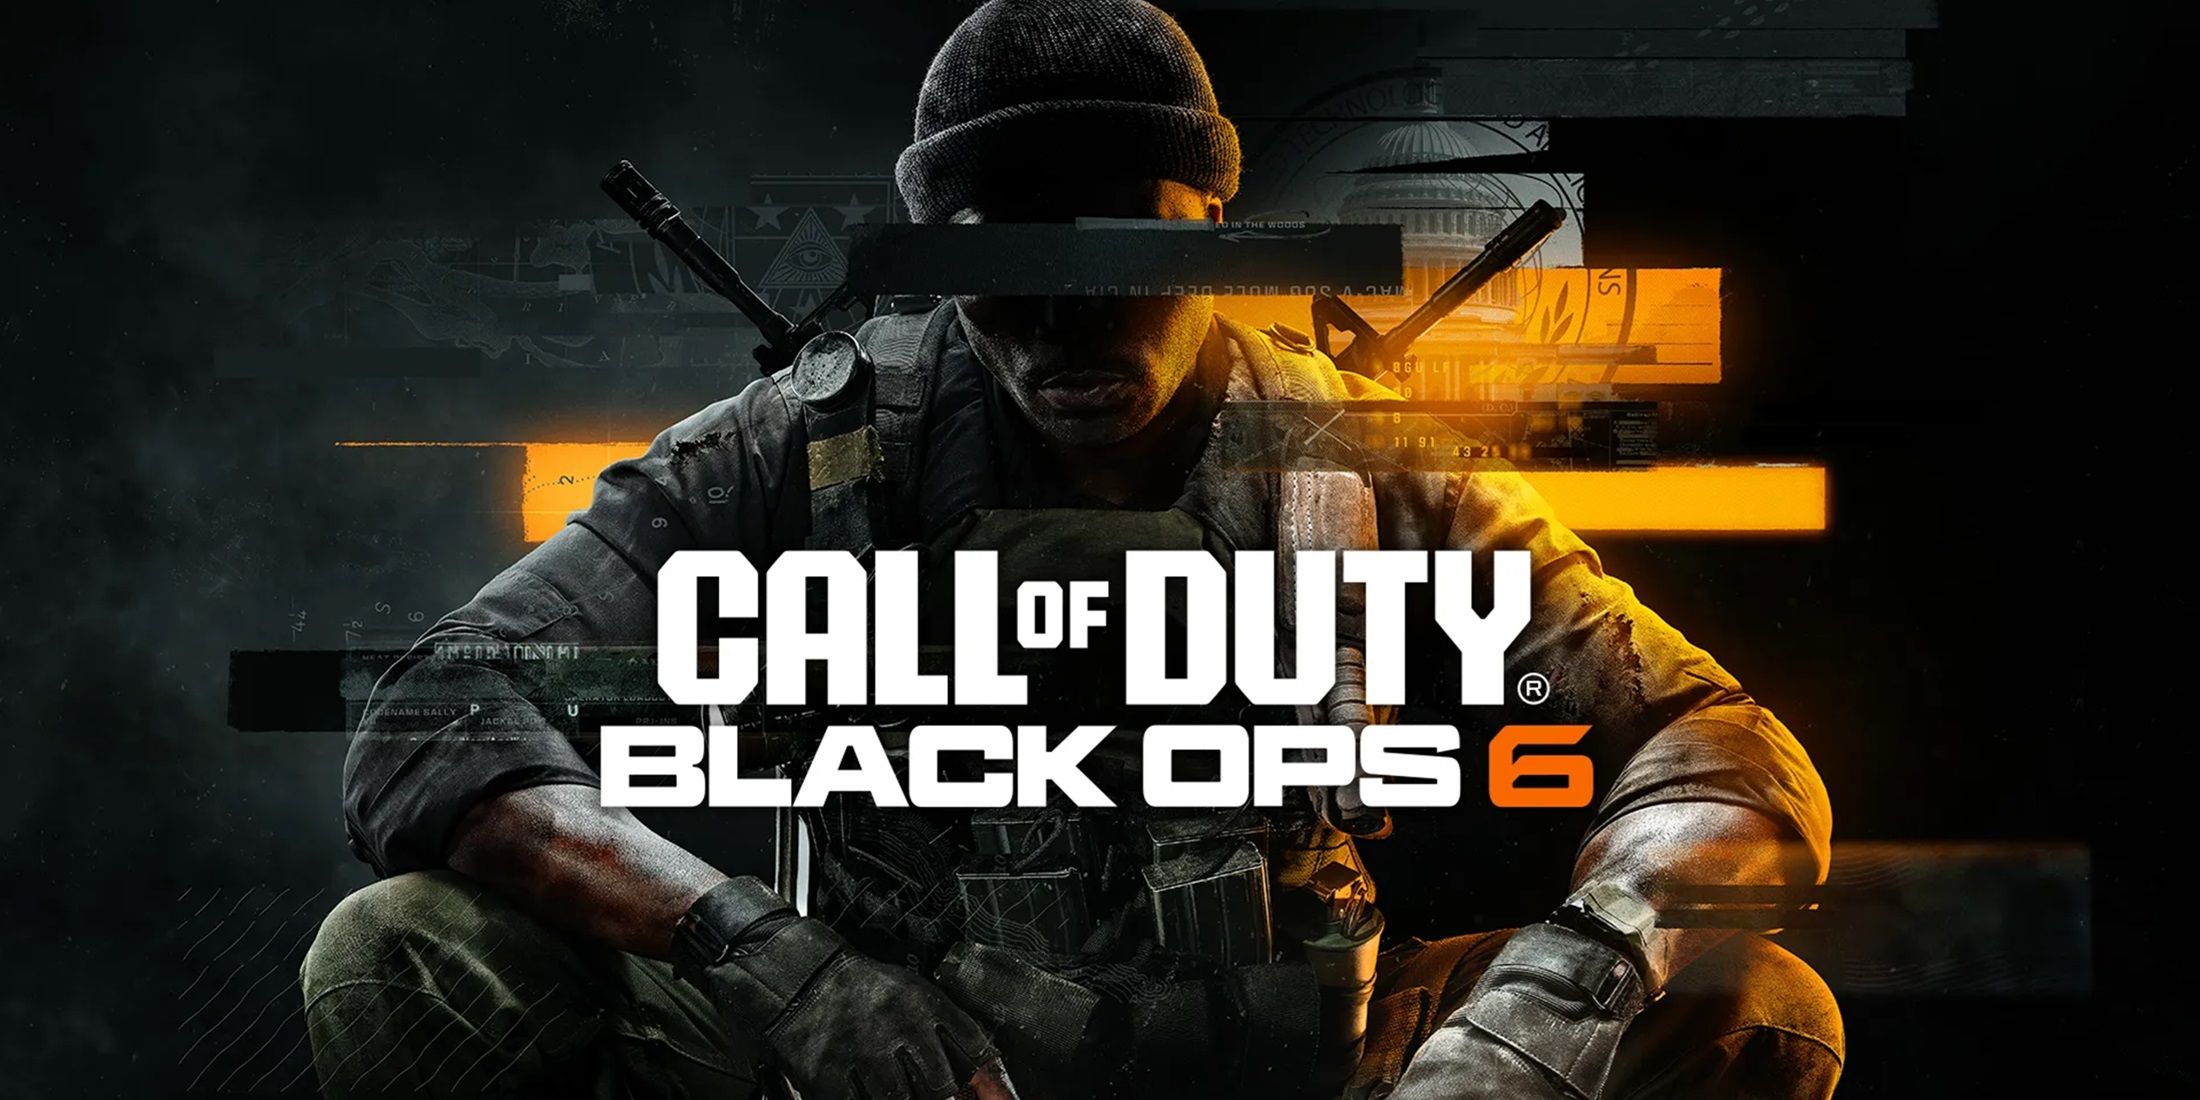 call of duty black ops 6 9/11 mission